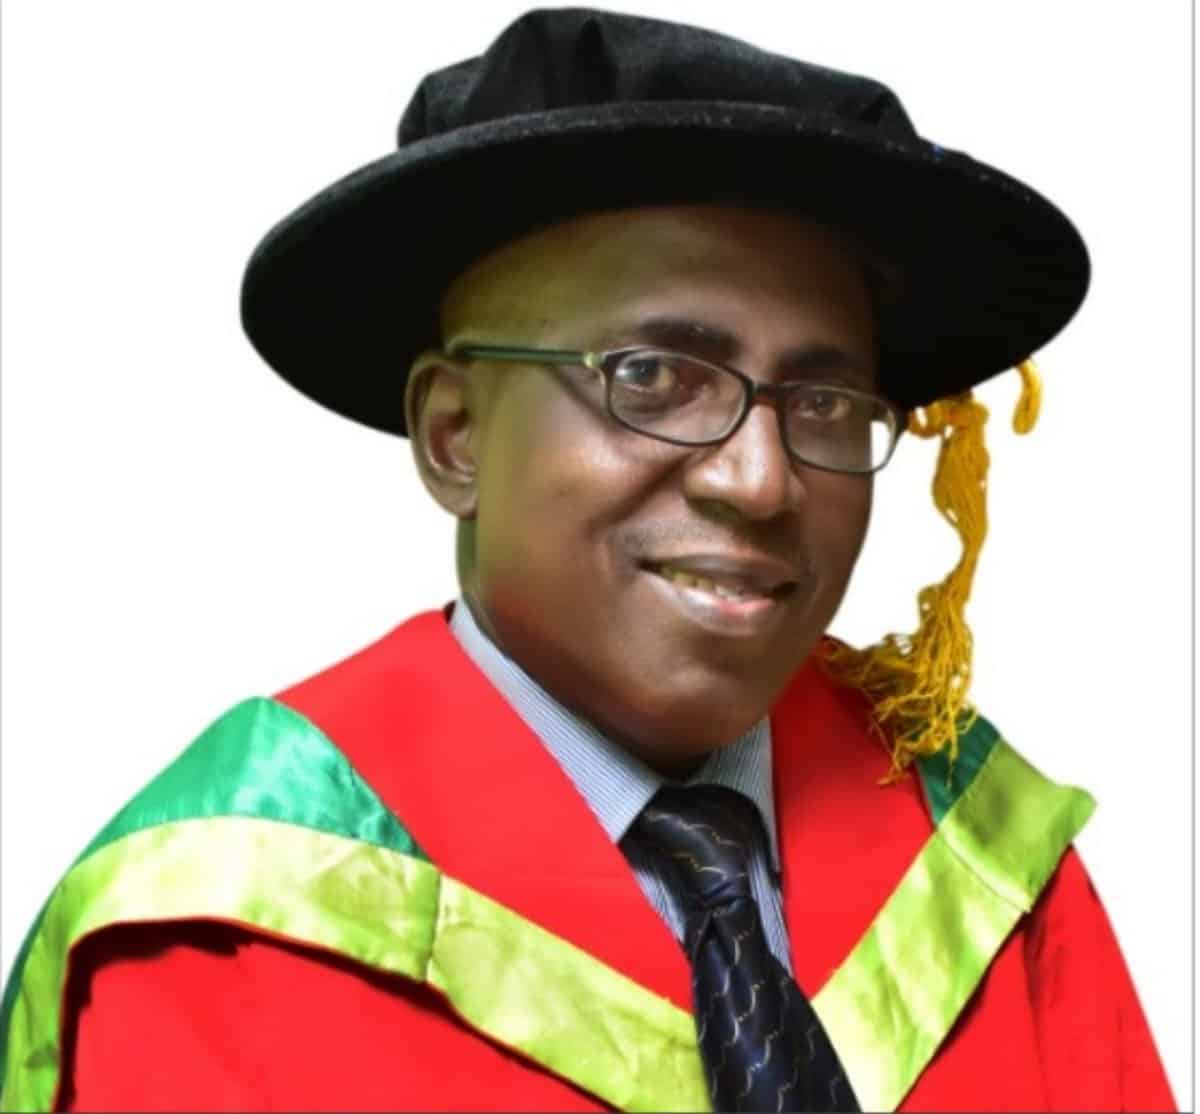 Federal University of Agriculture Abeokuta (FUNAAB) Vice-Chancellor